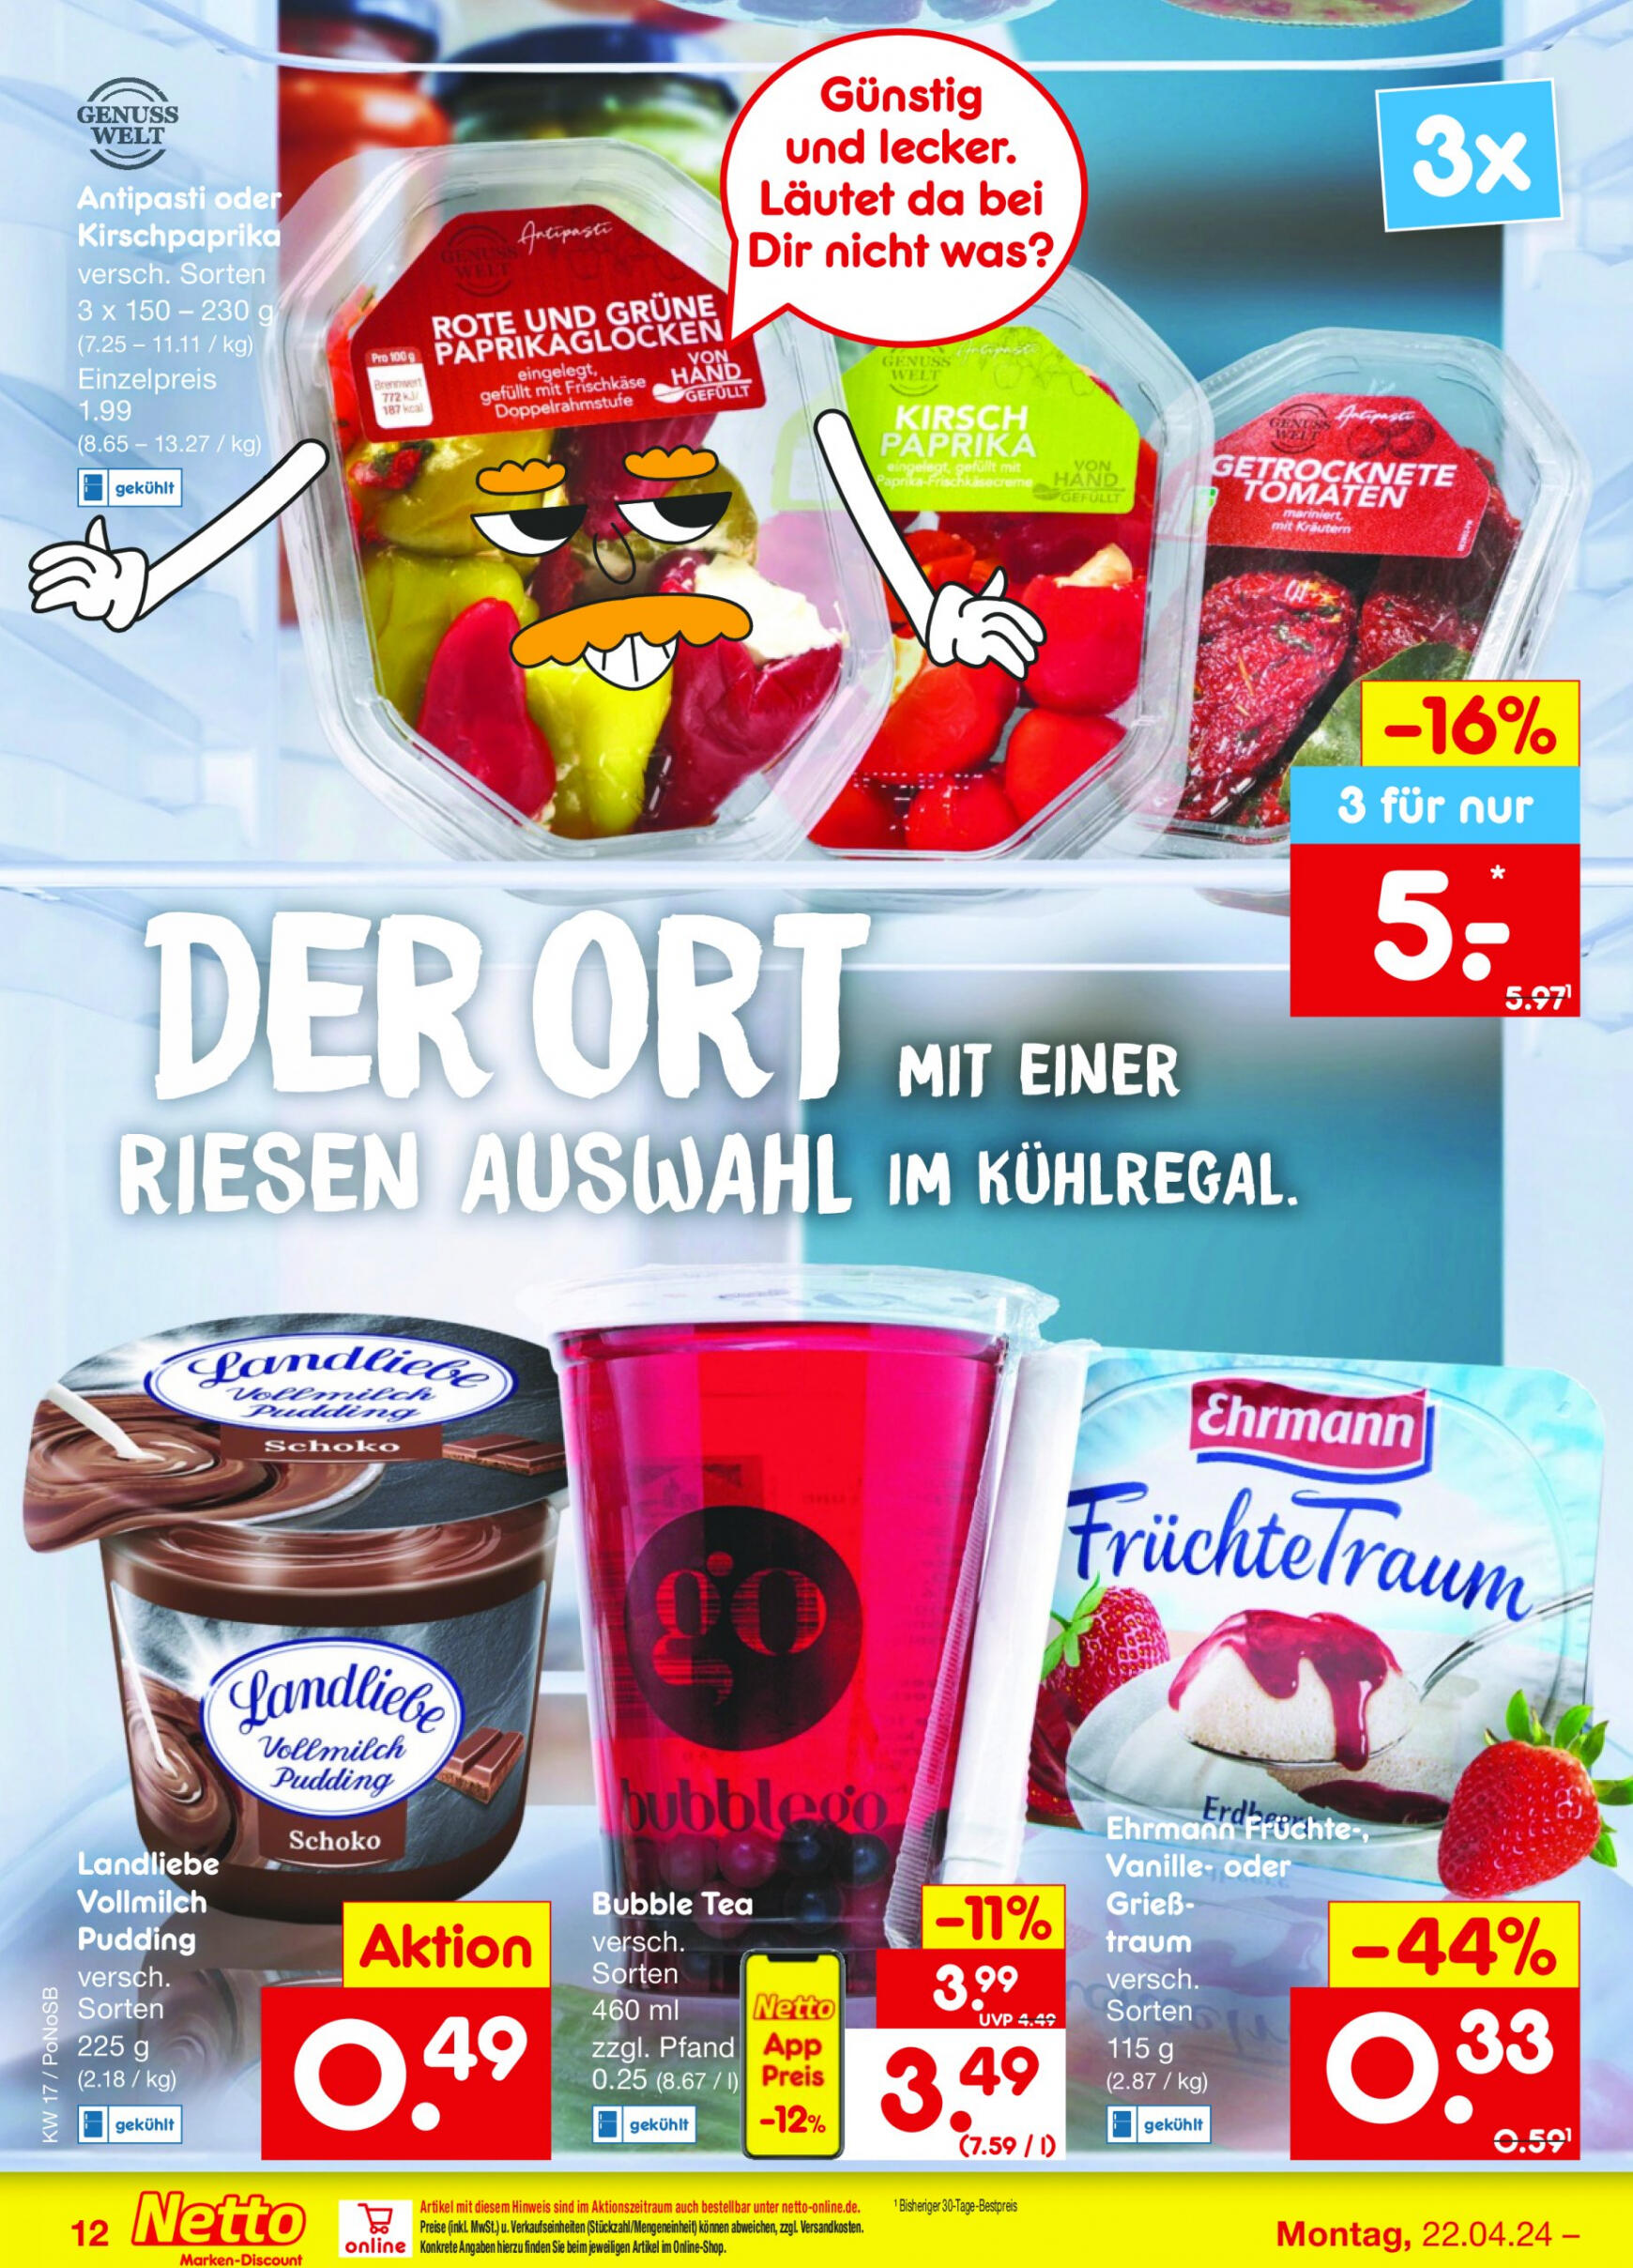 netto - Flyer Netto aktuell 22.04. - 27.04. - page: 12